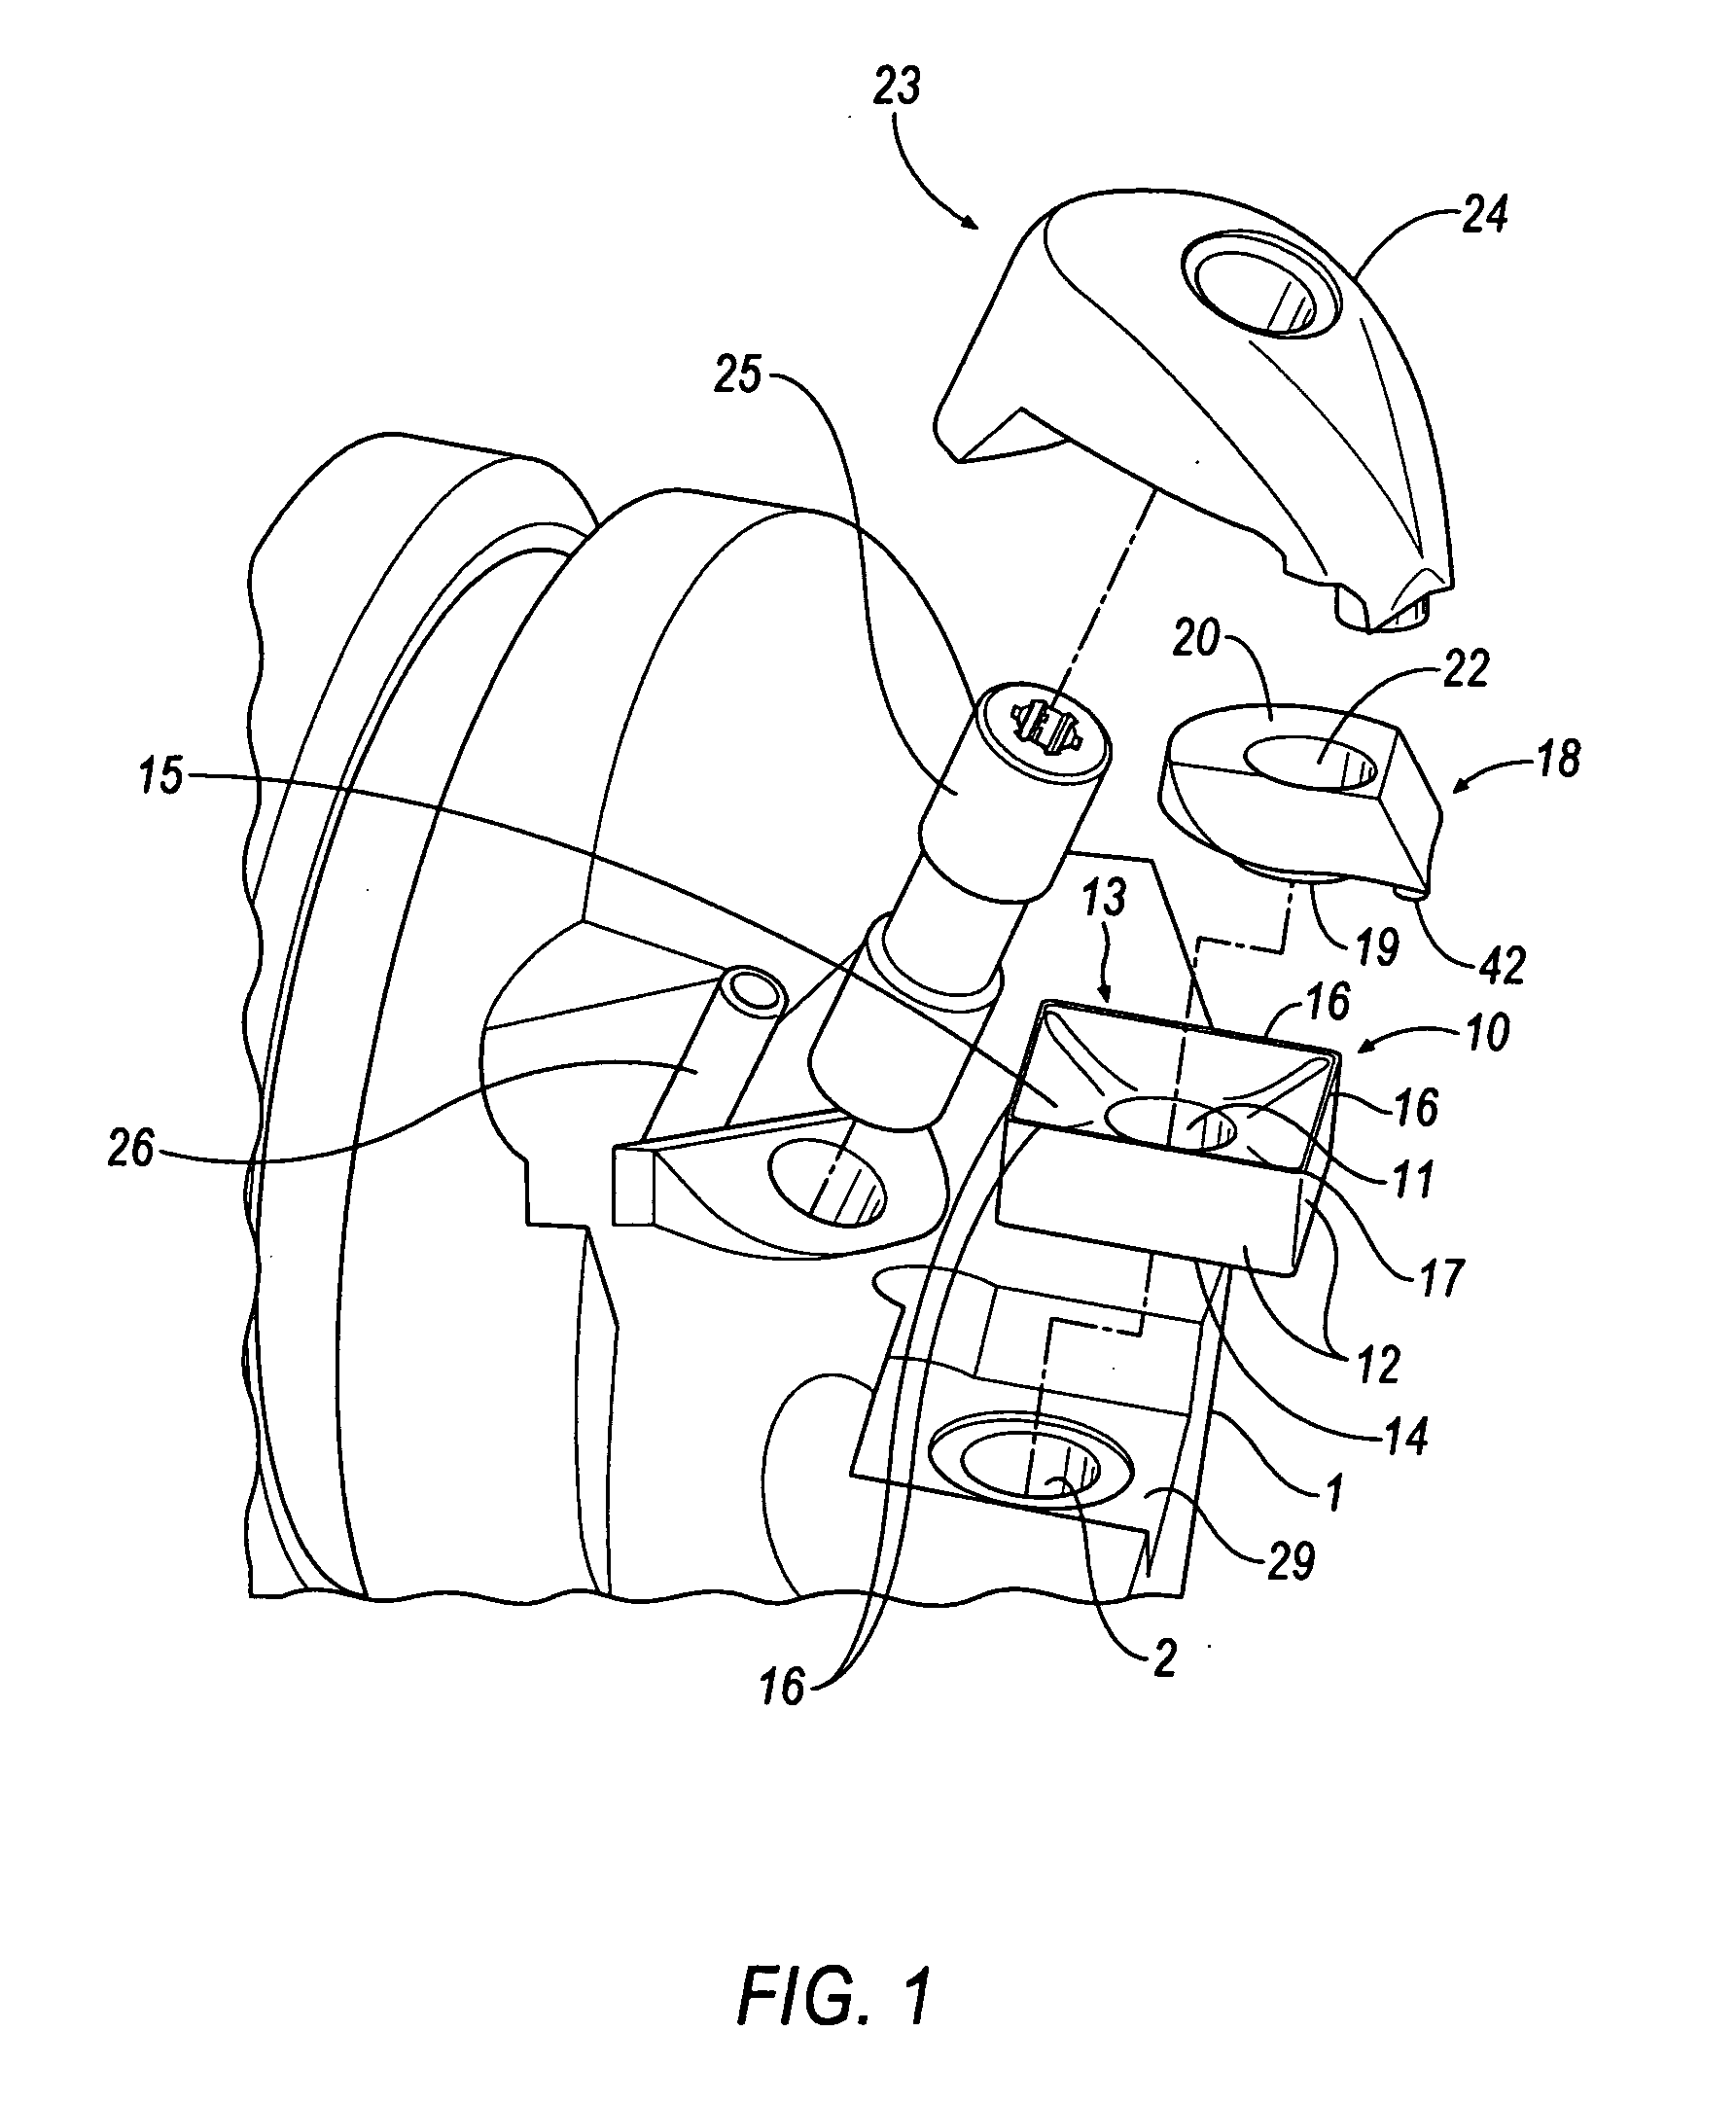 Metal cutting system for effective coolant delivery